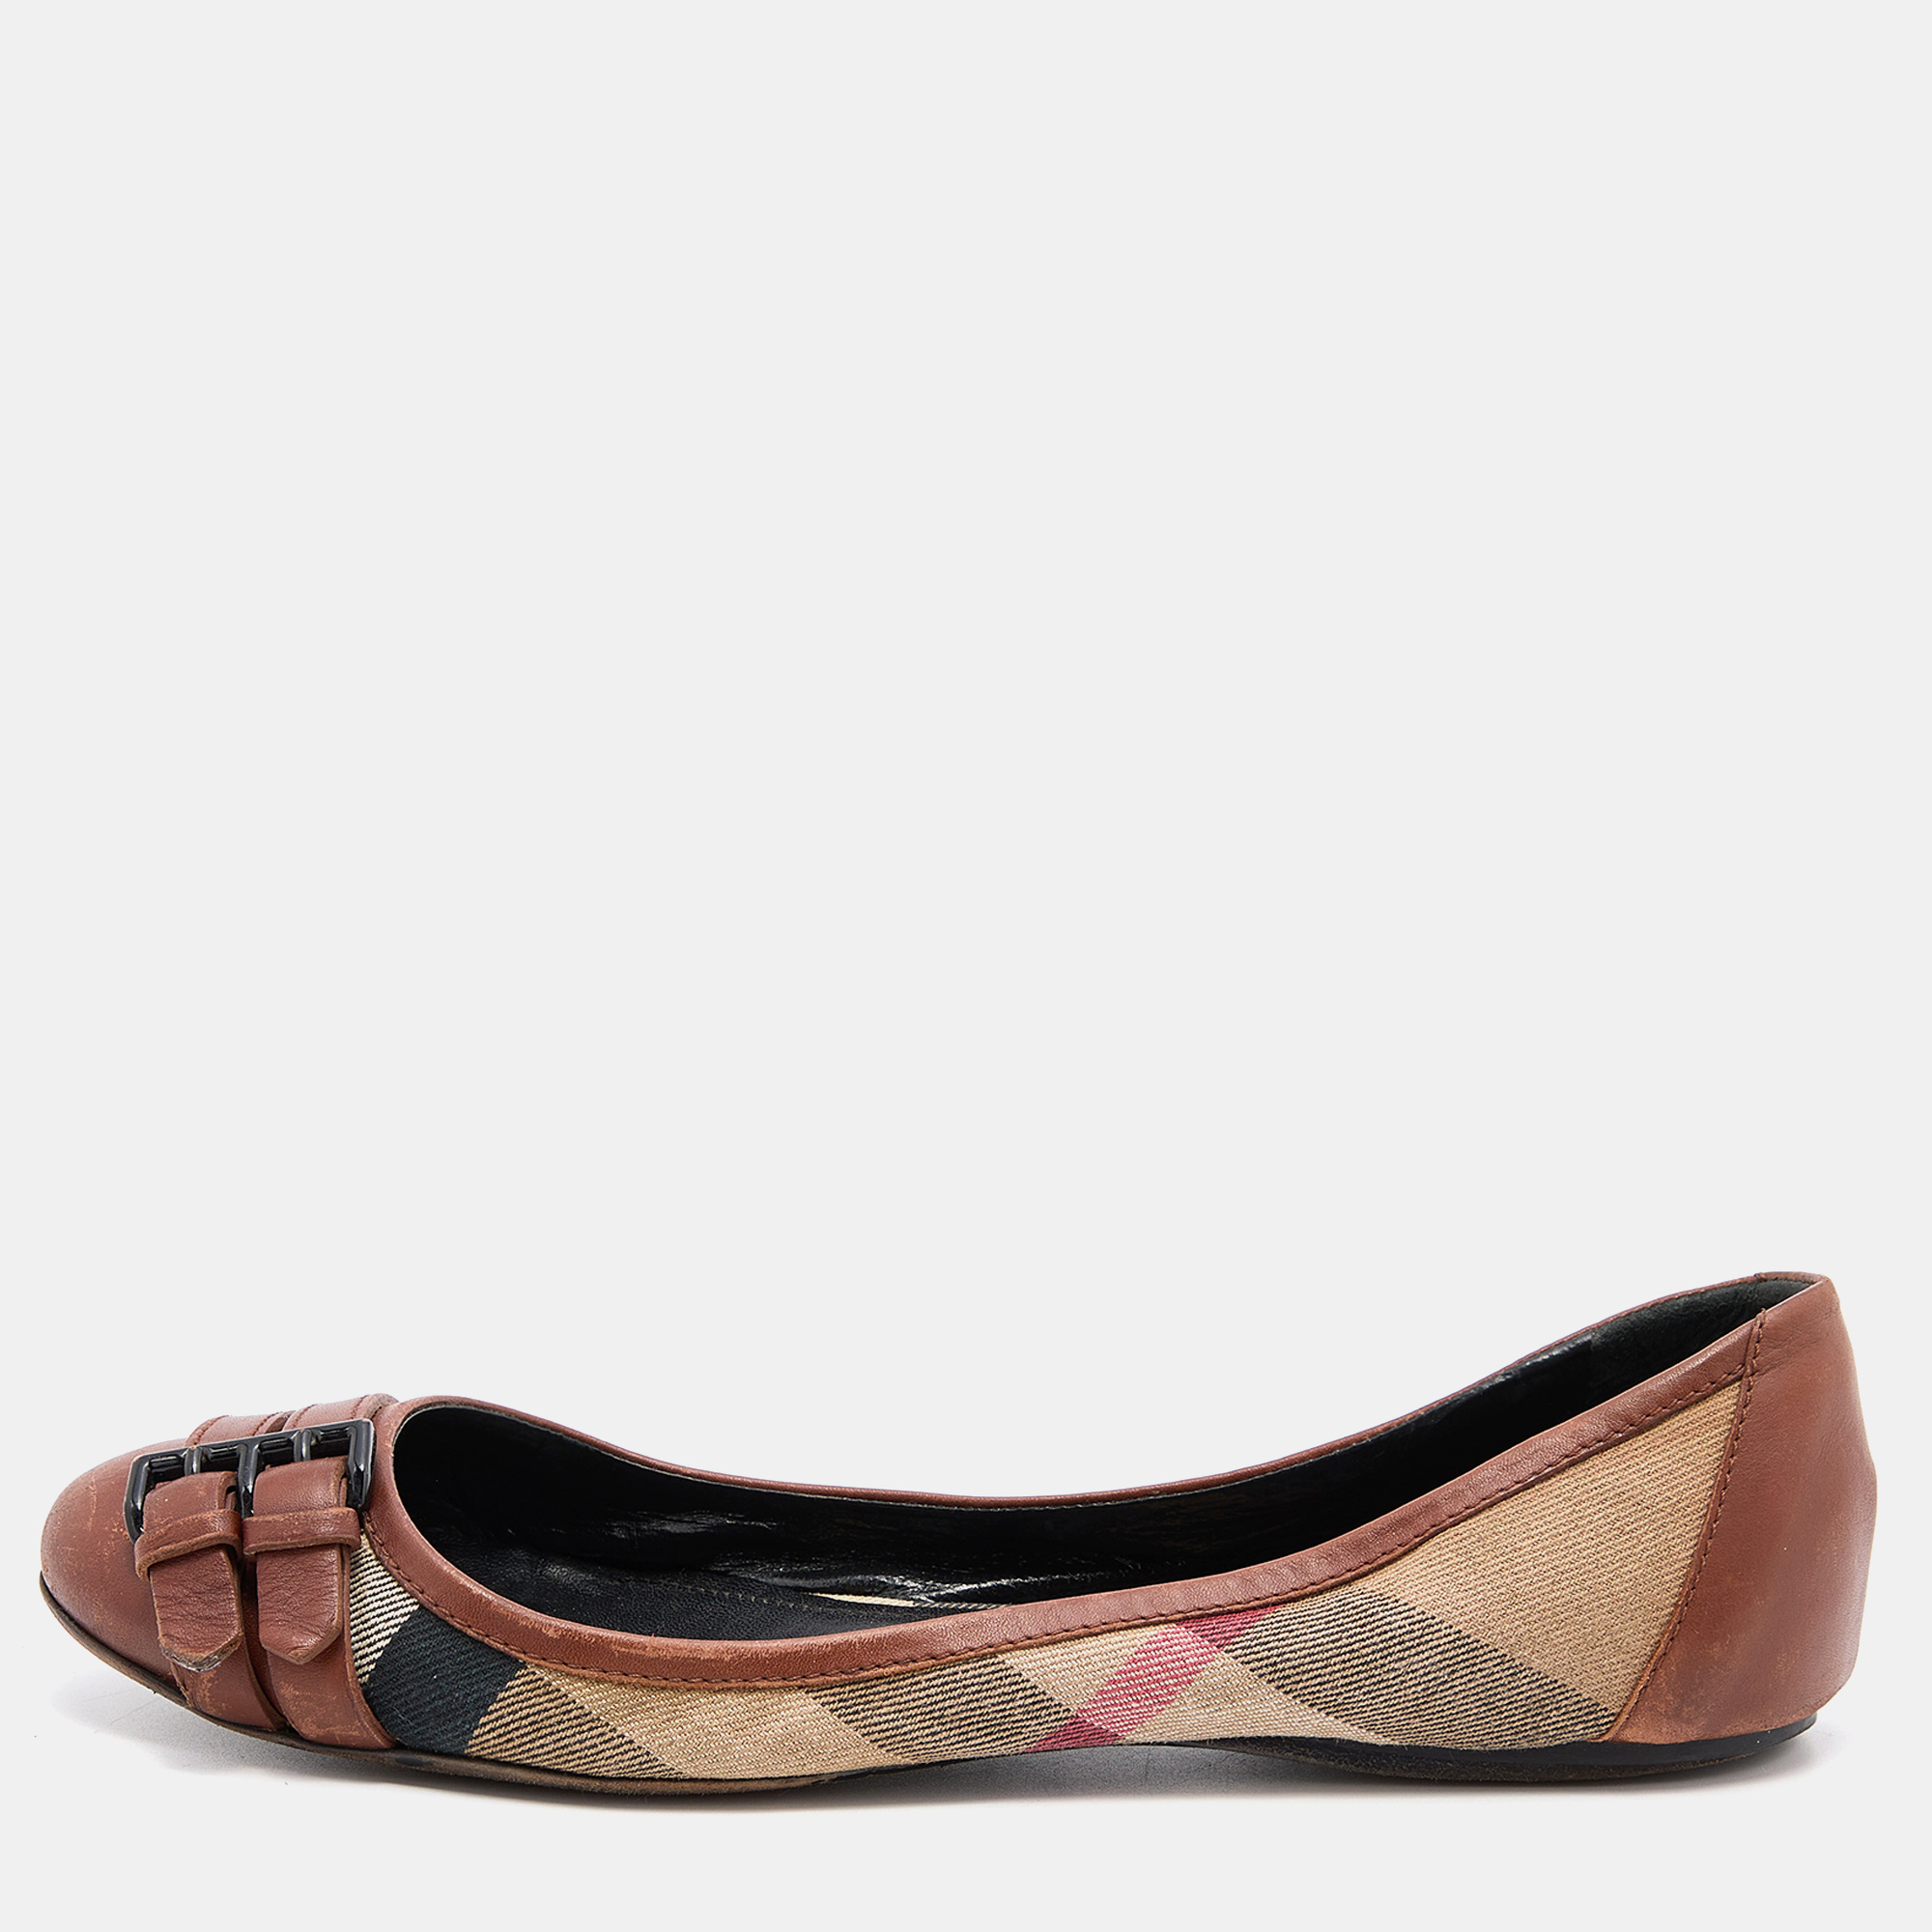 

Burberry Beige/Tan Nova Check Canvas and Leather Buckle Ballet Flats Size